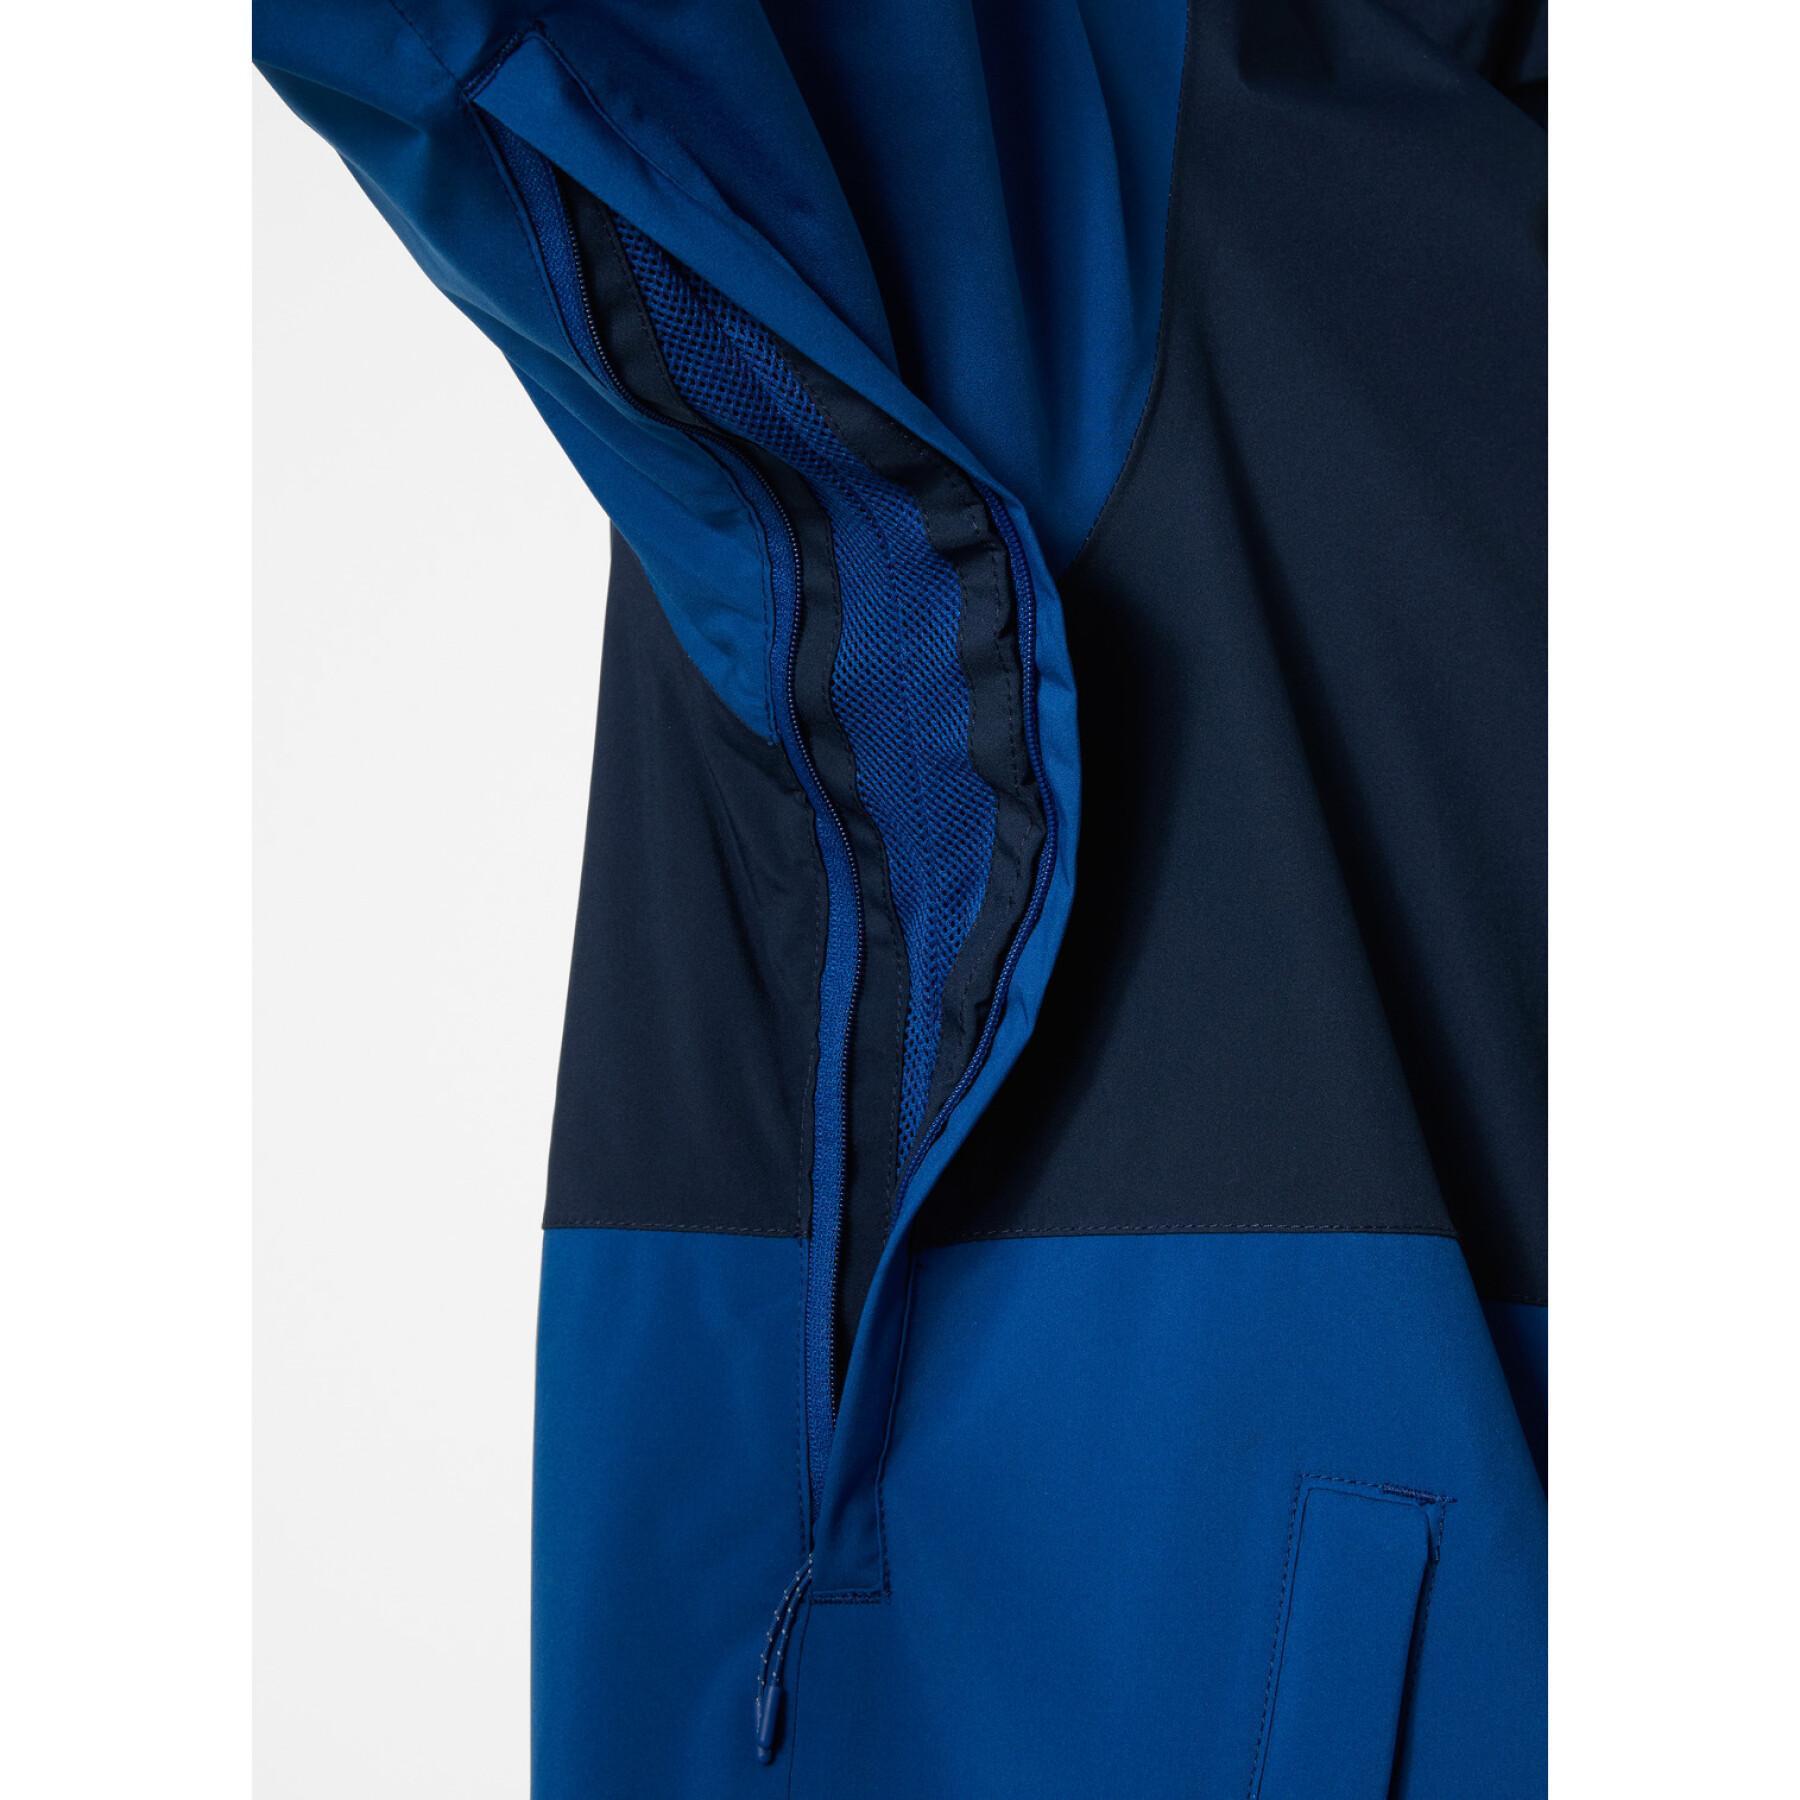 Chaqueta impermeable Helly Hansen Juell Storm